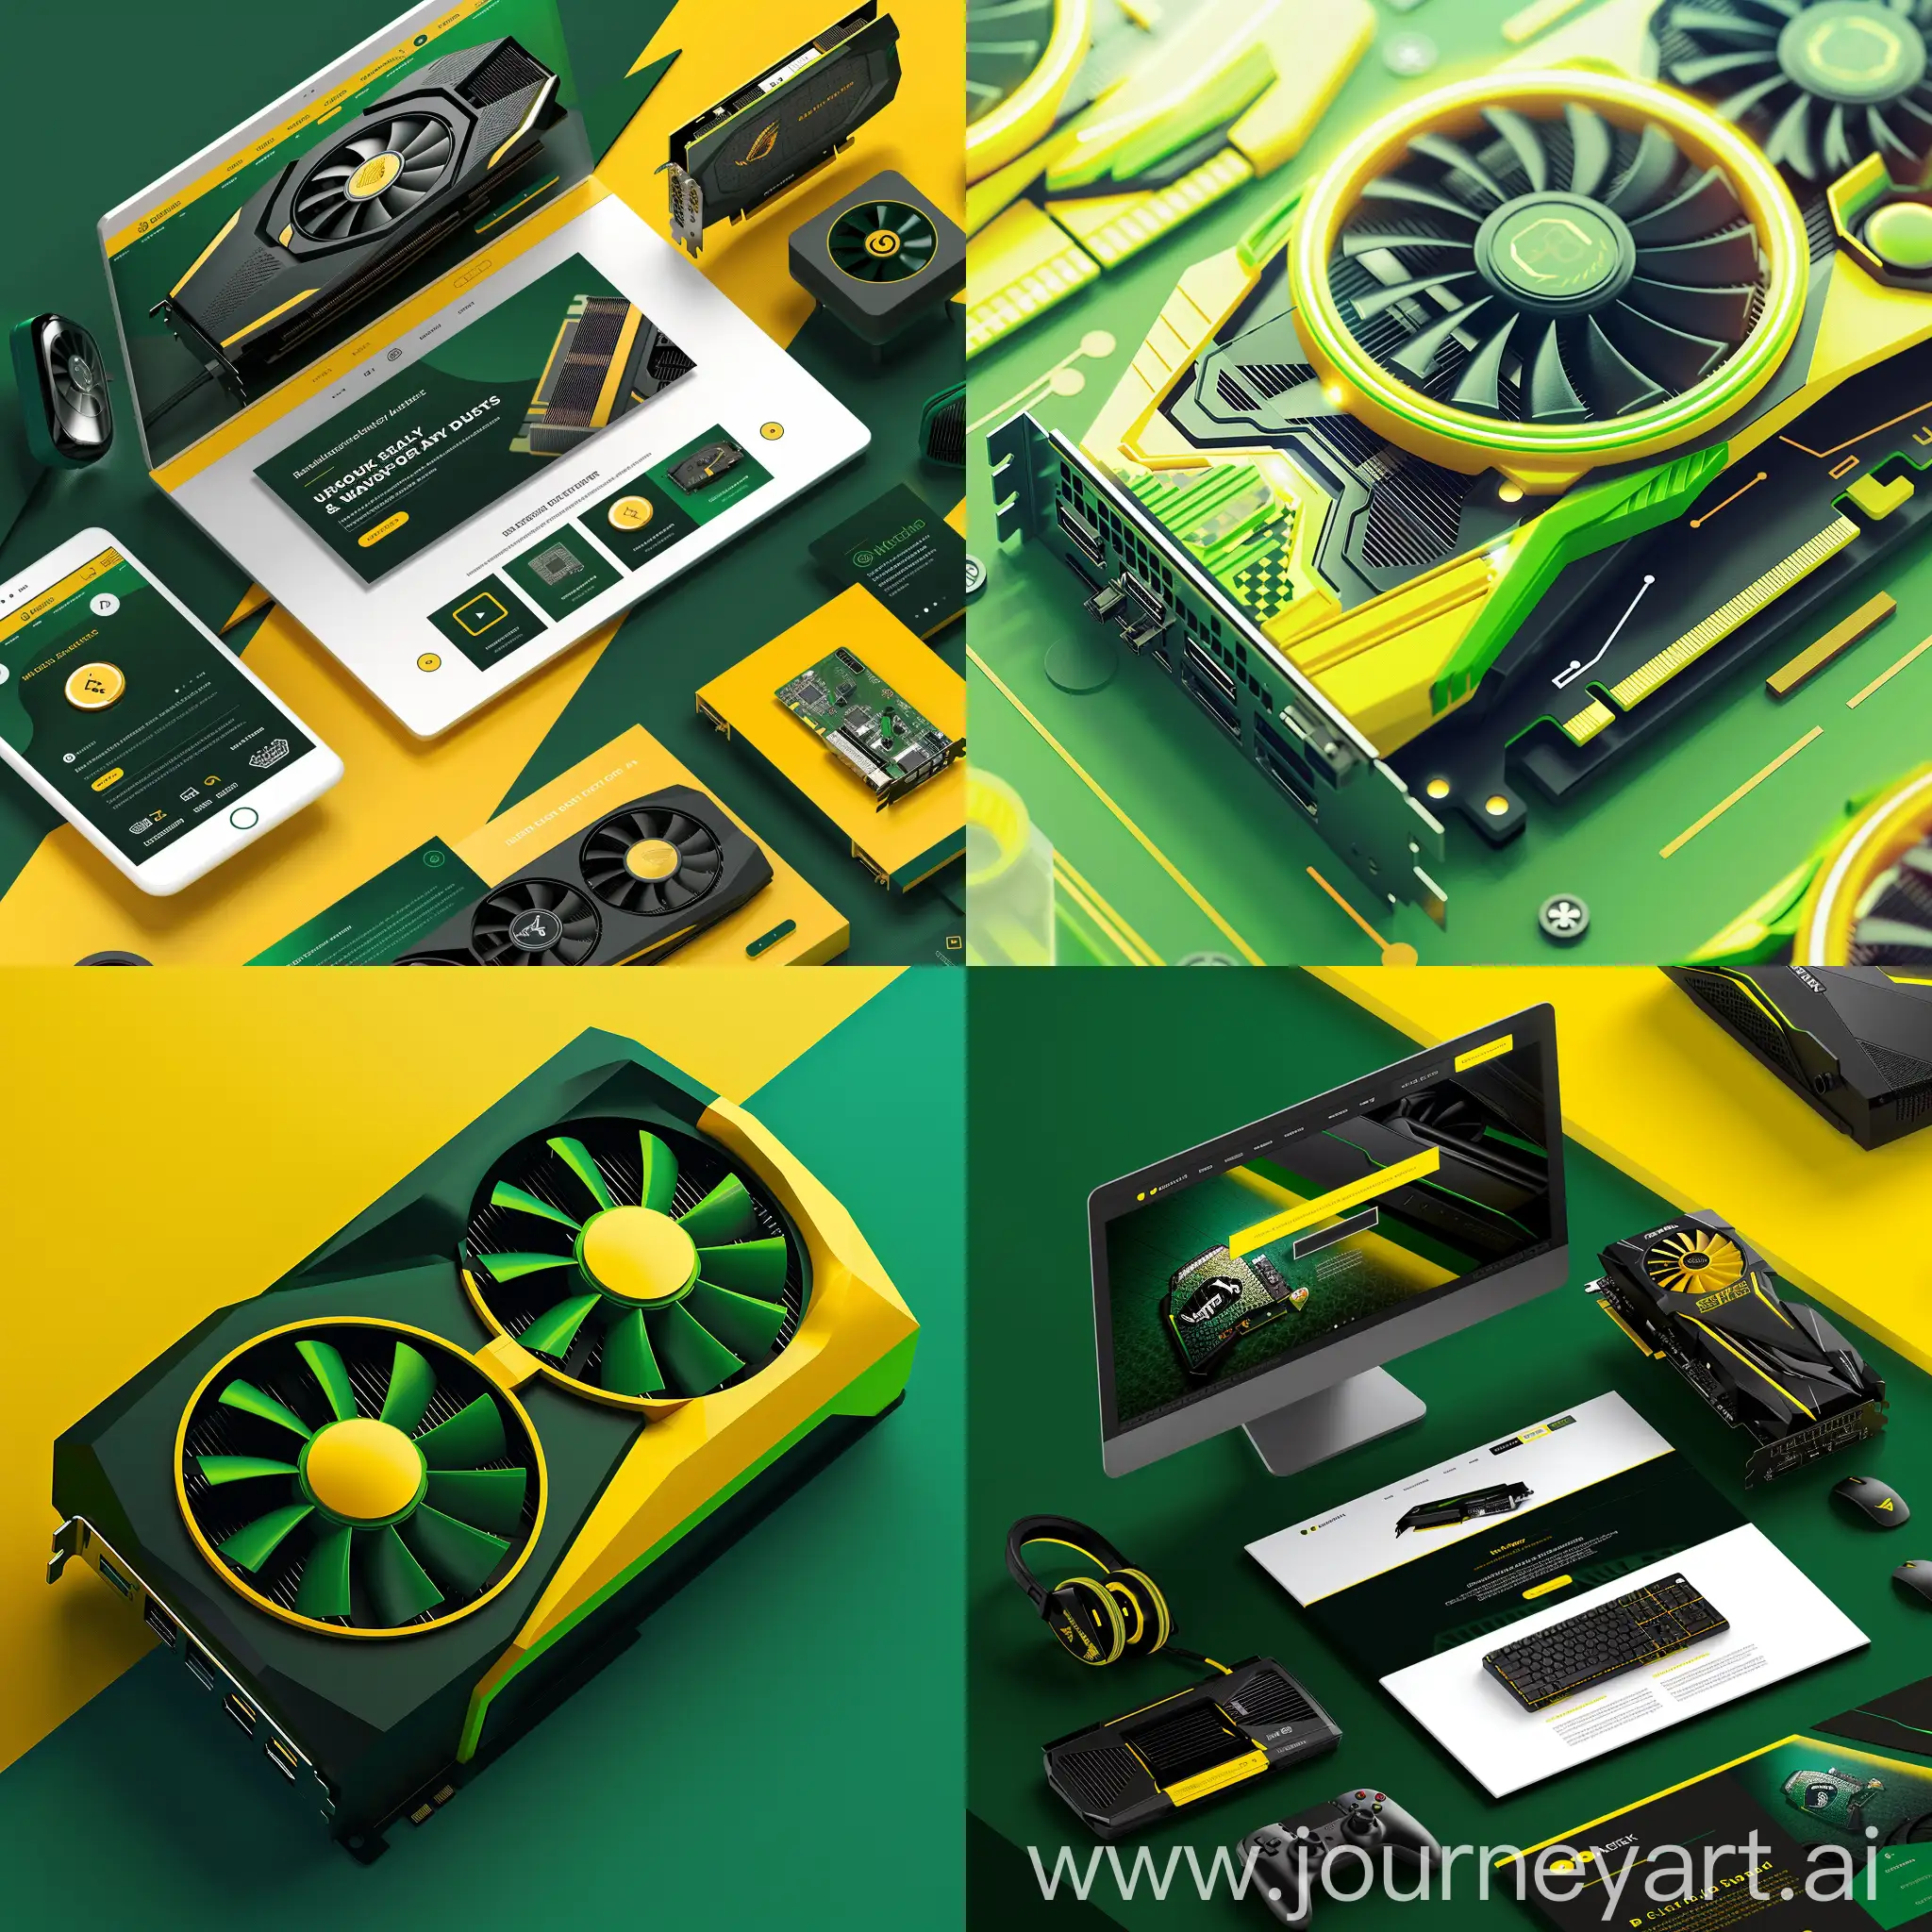 Website design, video card sales, ui, ux, green and yellow colors